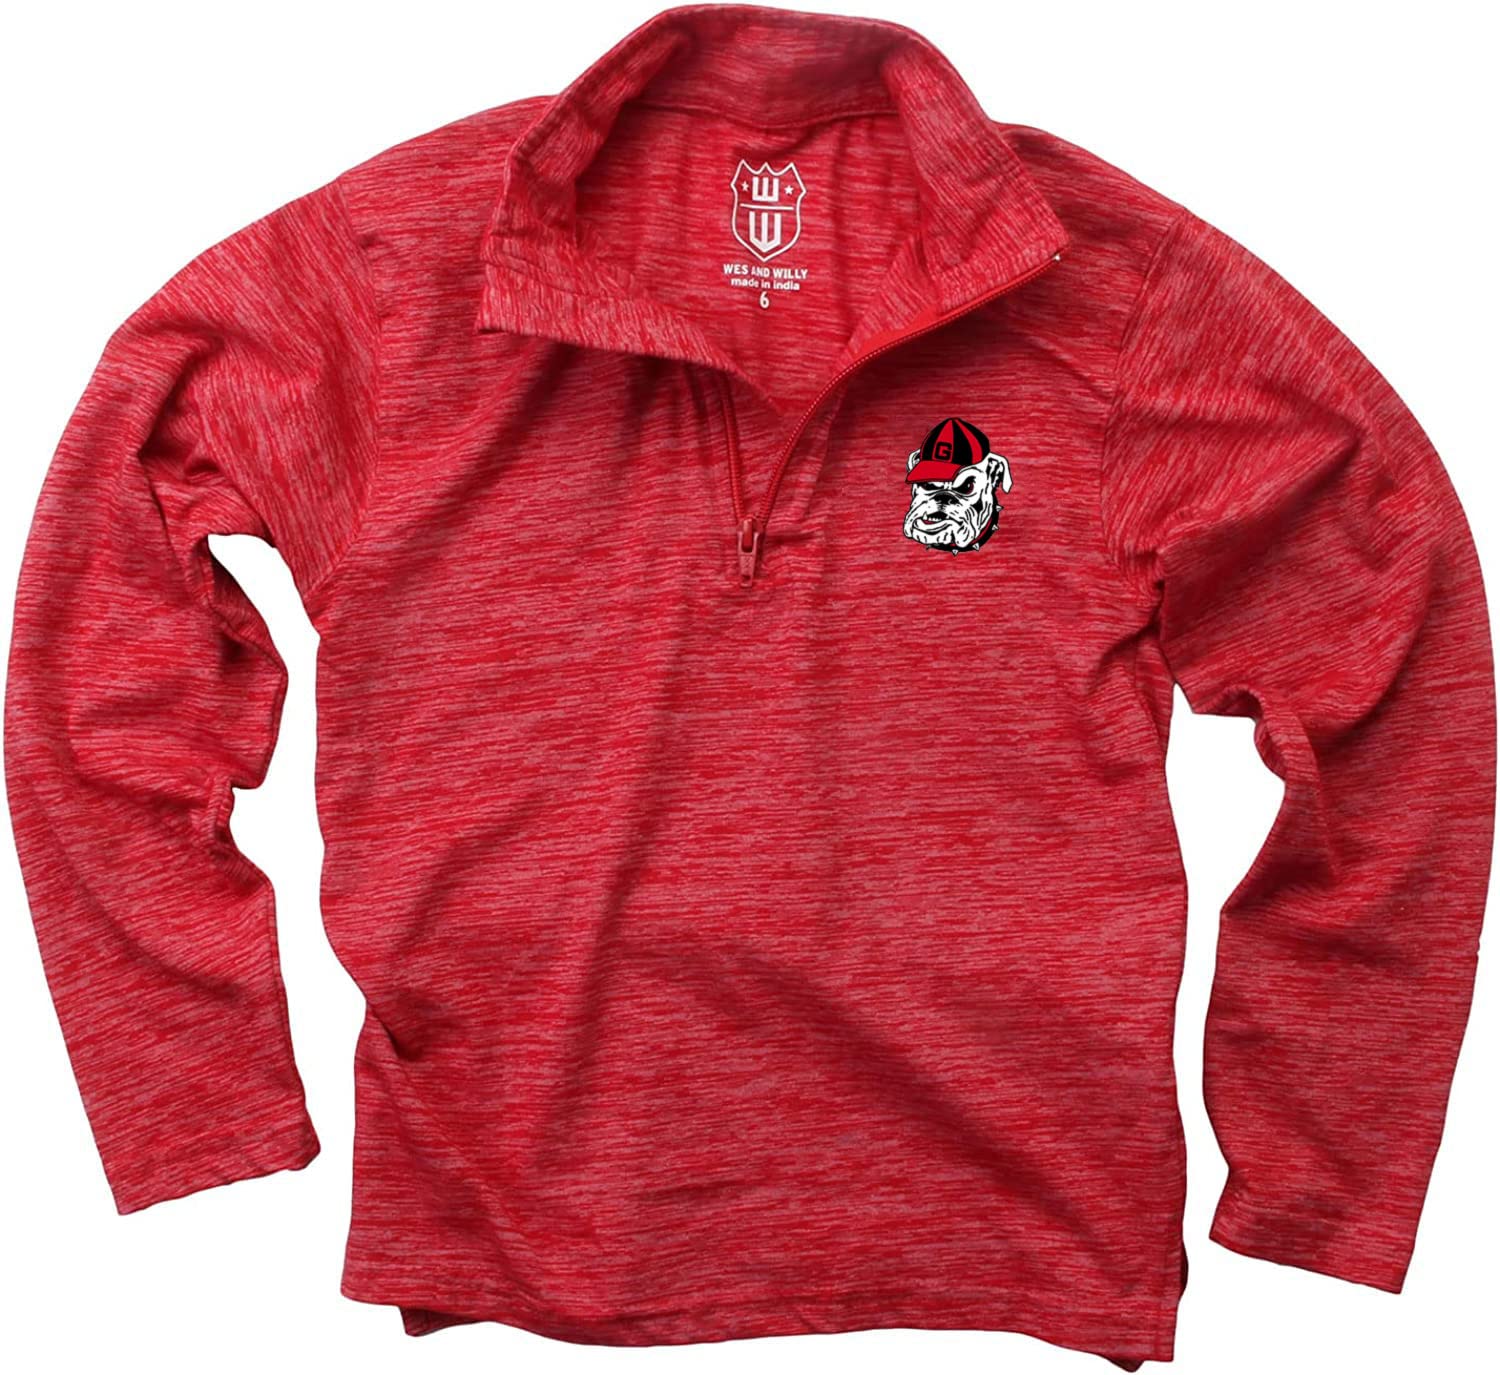 Wes And Willy Georgia Bulldogs Youth Boys Cloudy Yarn Long Sleeve Quarter Zip